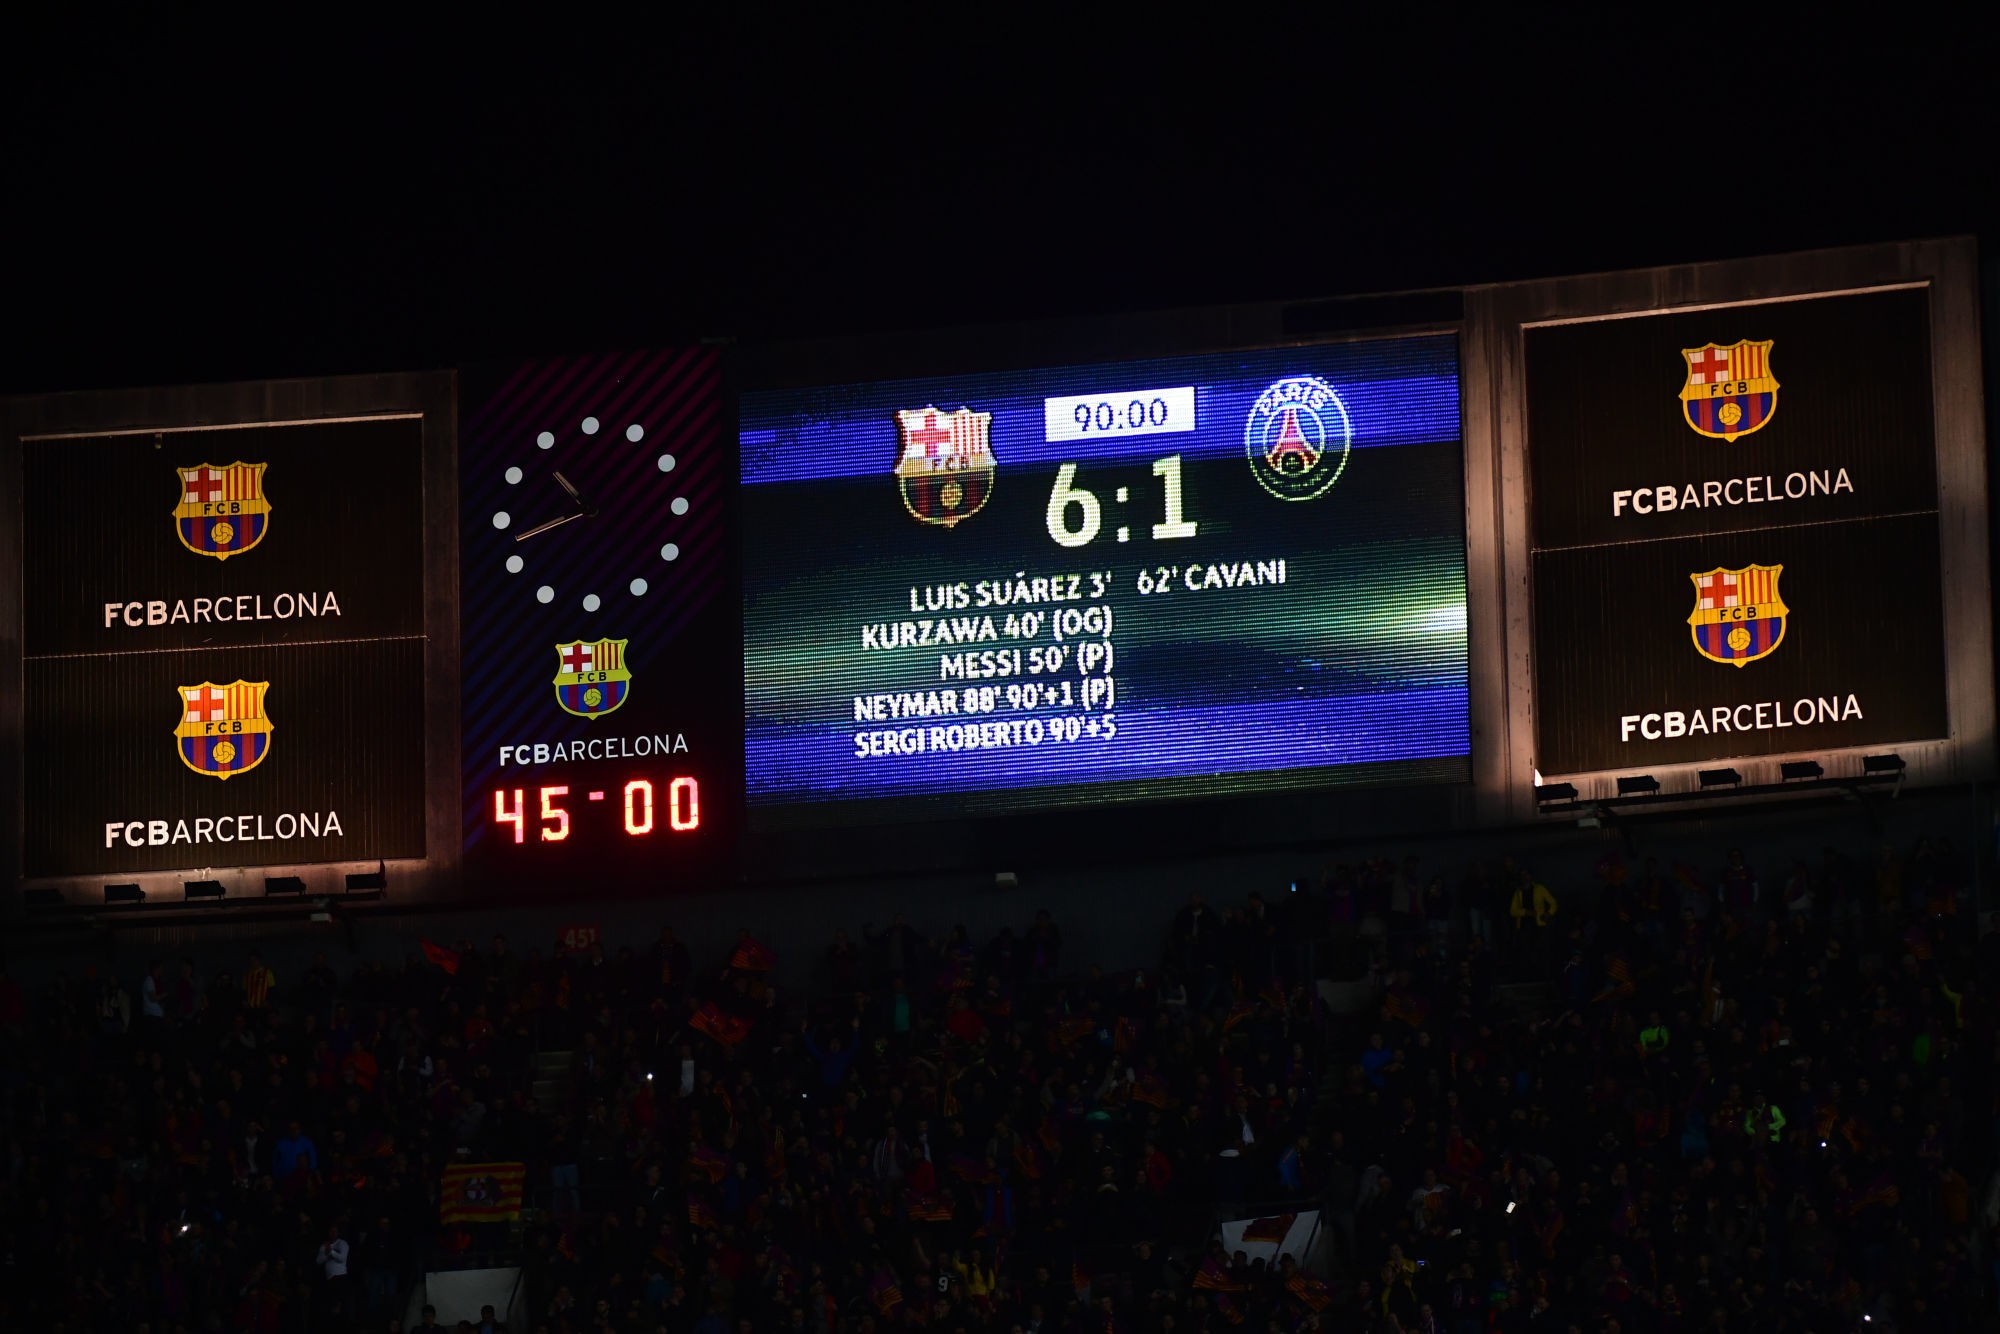 The final score in the Uefa Champions League Round of 16 second leg match between FC Barcelona and Paris Saint Germain at Camp Nou on March 8, 2017 in Barcelona, Spain. (Photo by Dave Winter/Icon Spor